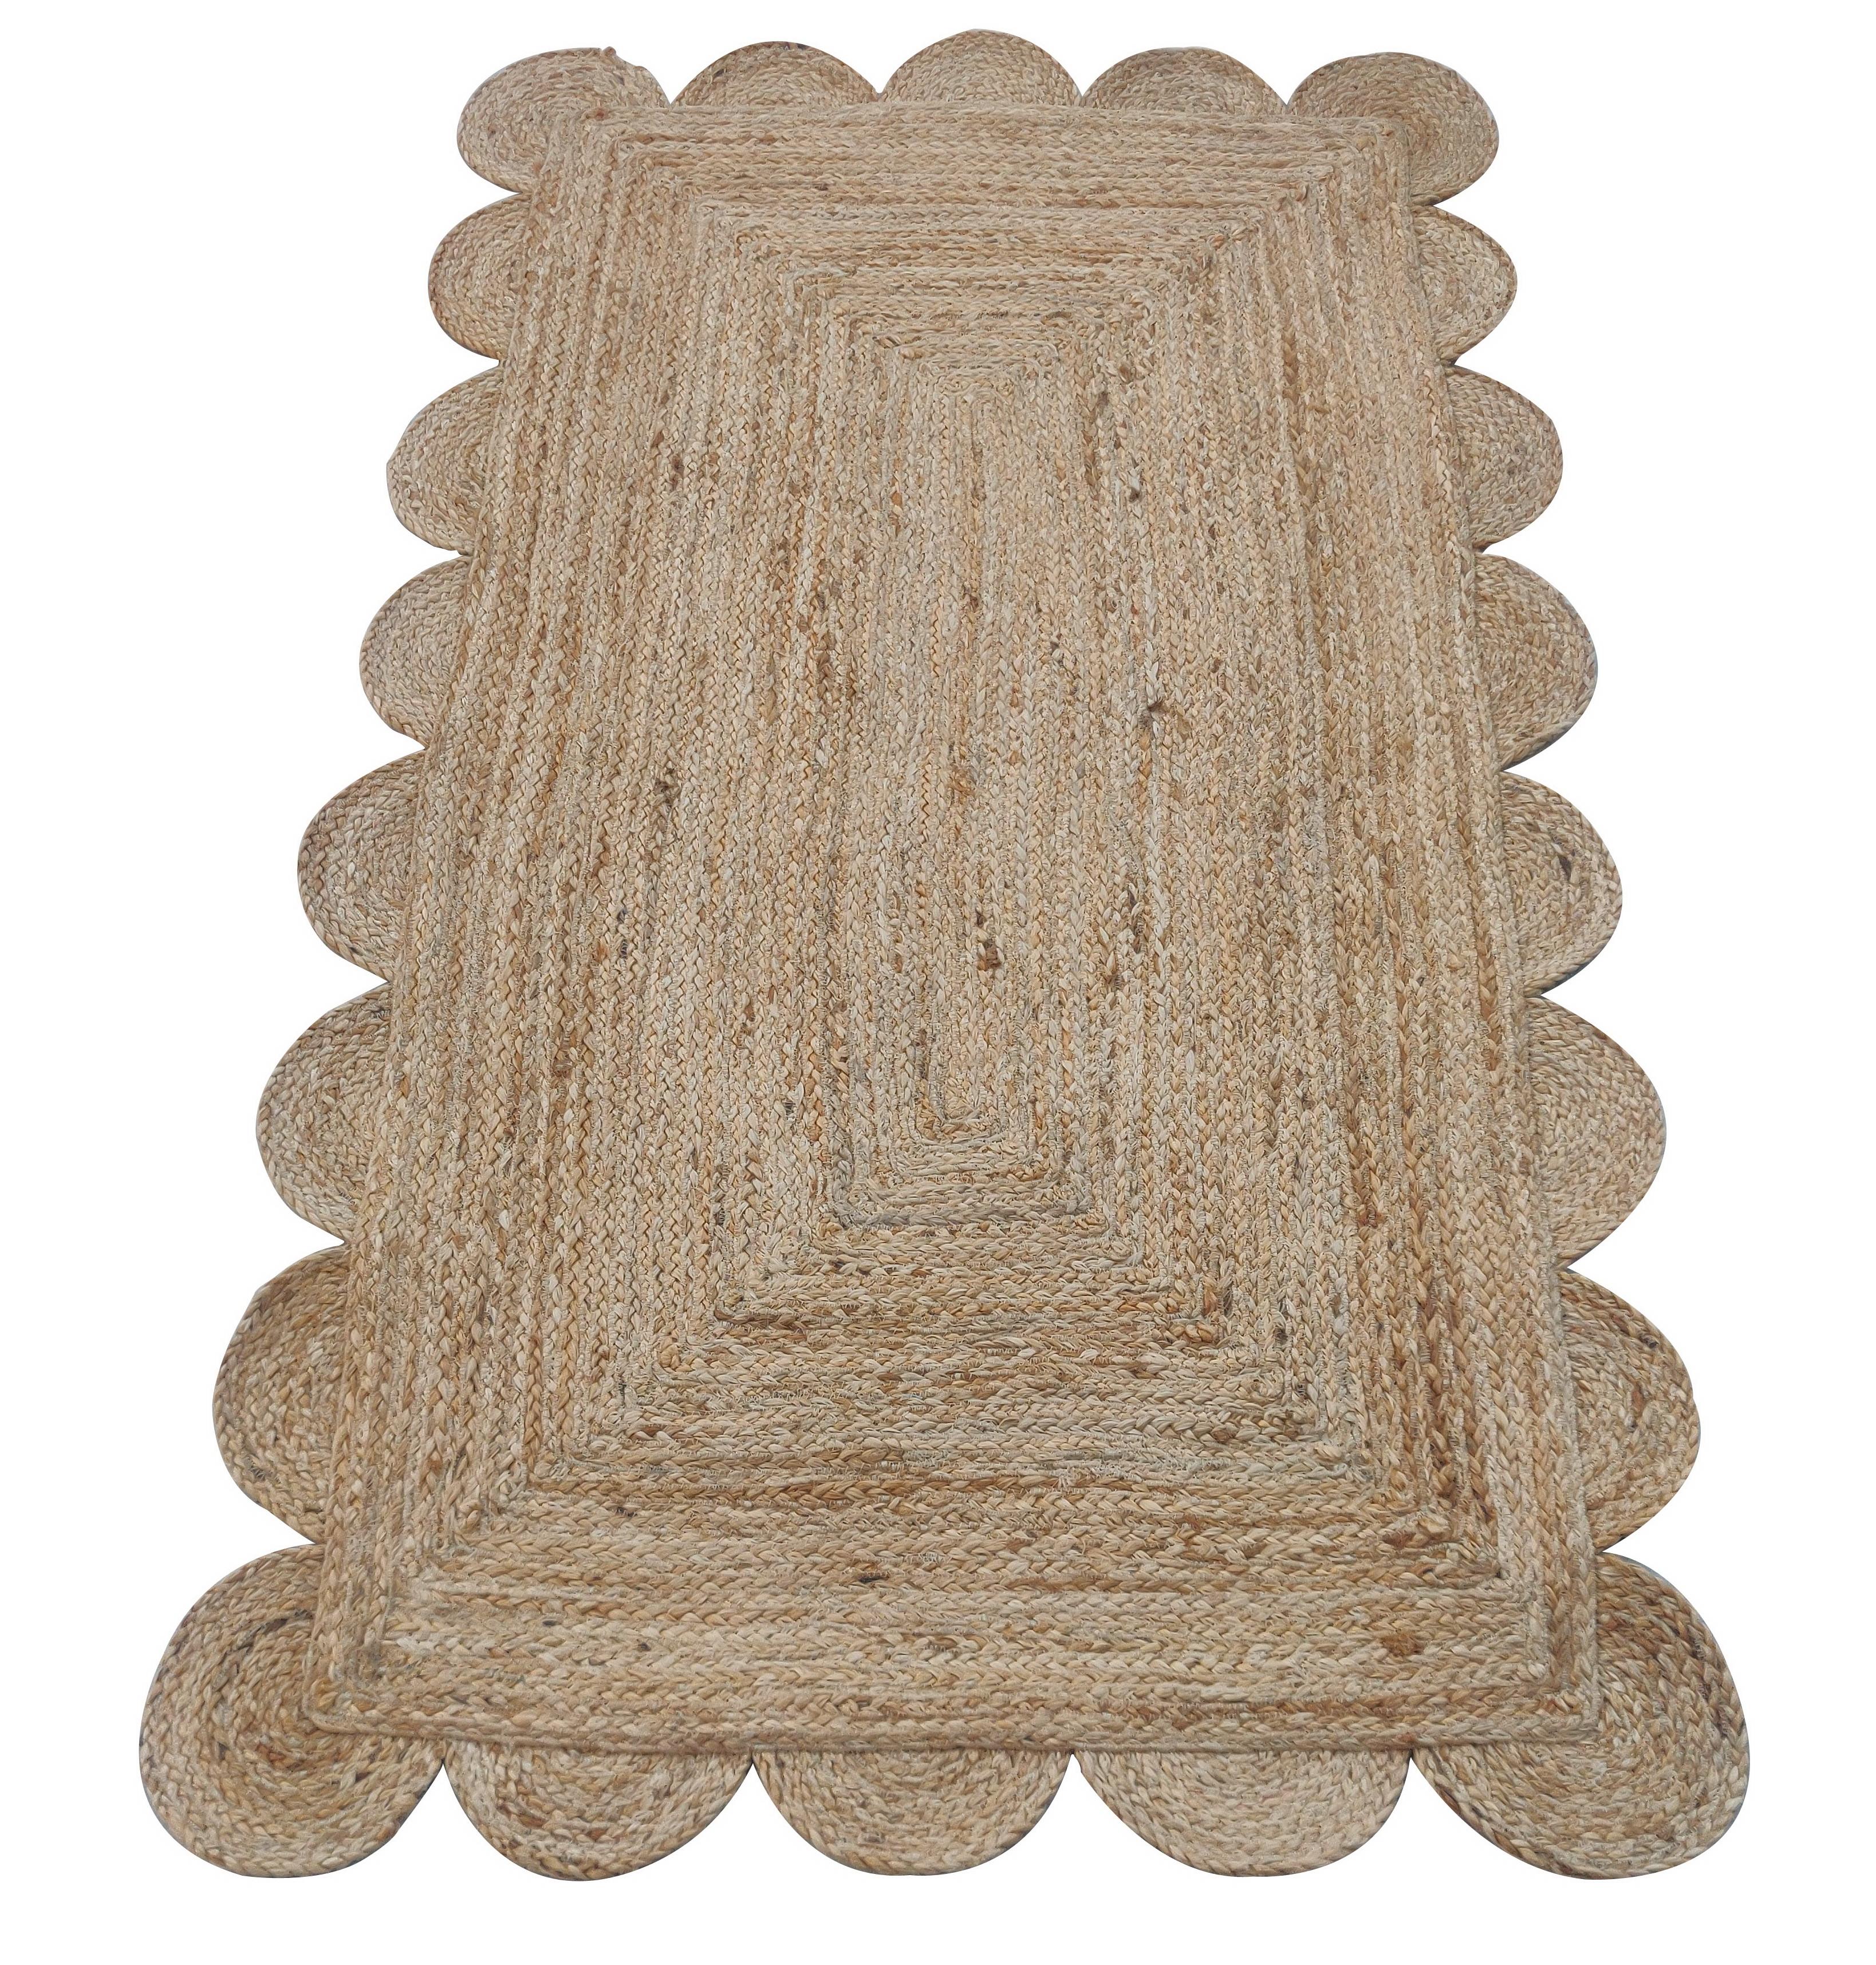 Handmade Jute Scalloped Rug, Natural Jute Dhurrie -3'x5'

These special flat-weave dhurries are hand-woven with 15 ply 100% cotton yarn. Due to the special manufacturing techniques used to create our rugs, the size and color of each piece may vary a